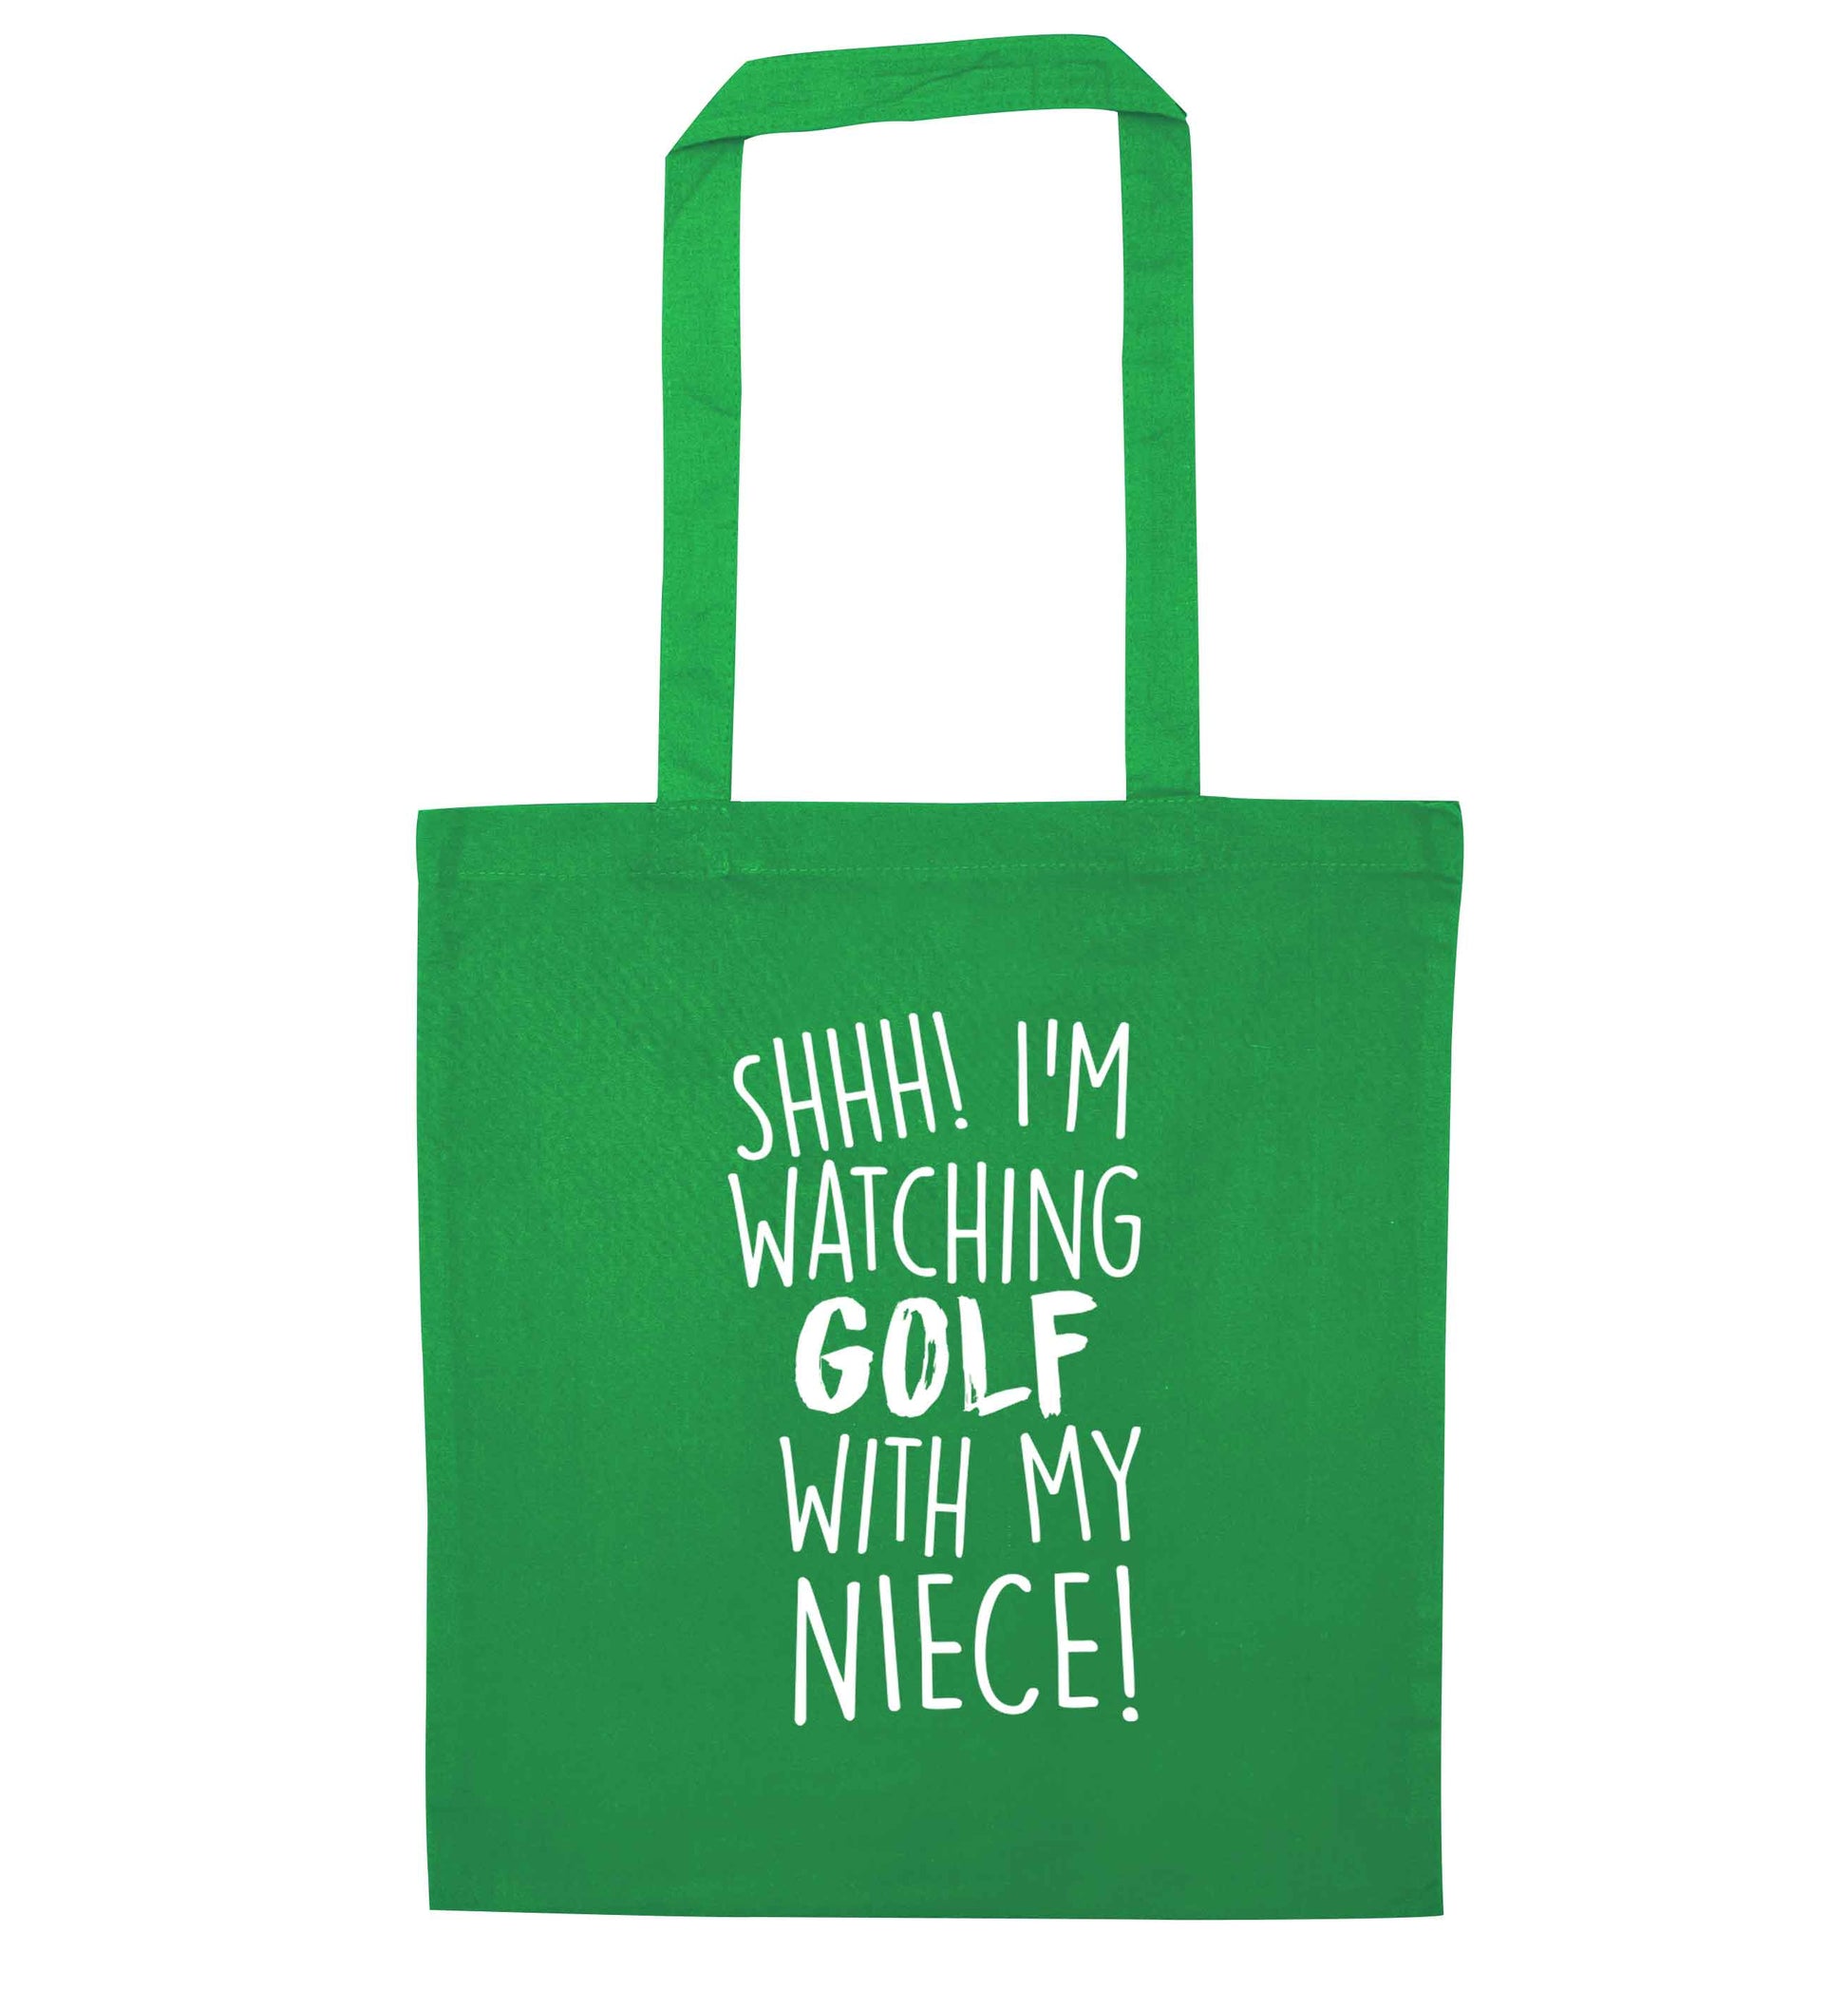 Shh I'm watching golf with my niece green tote bag